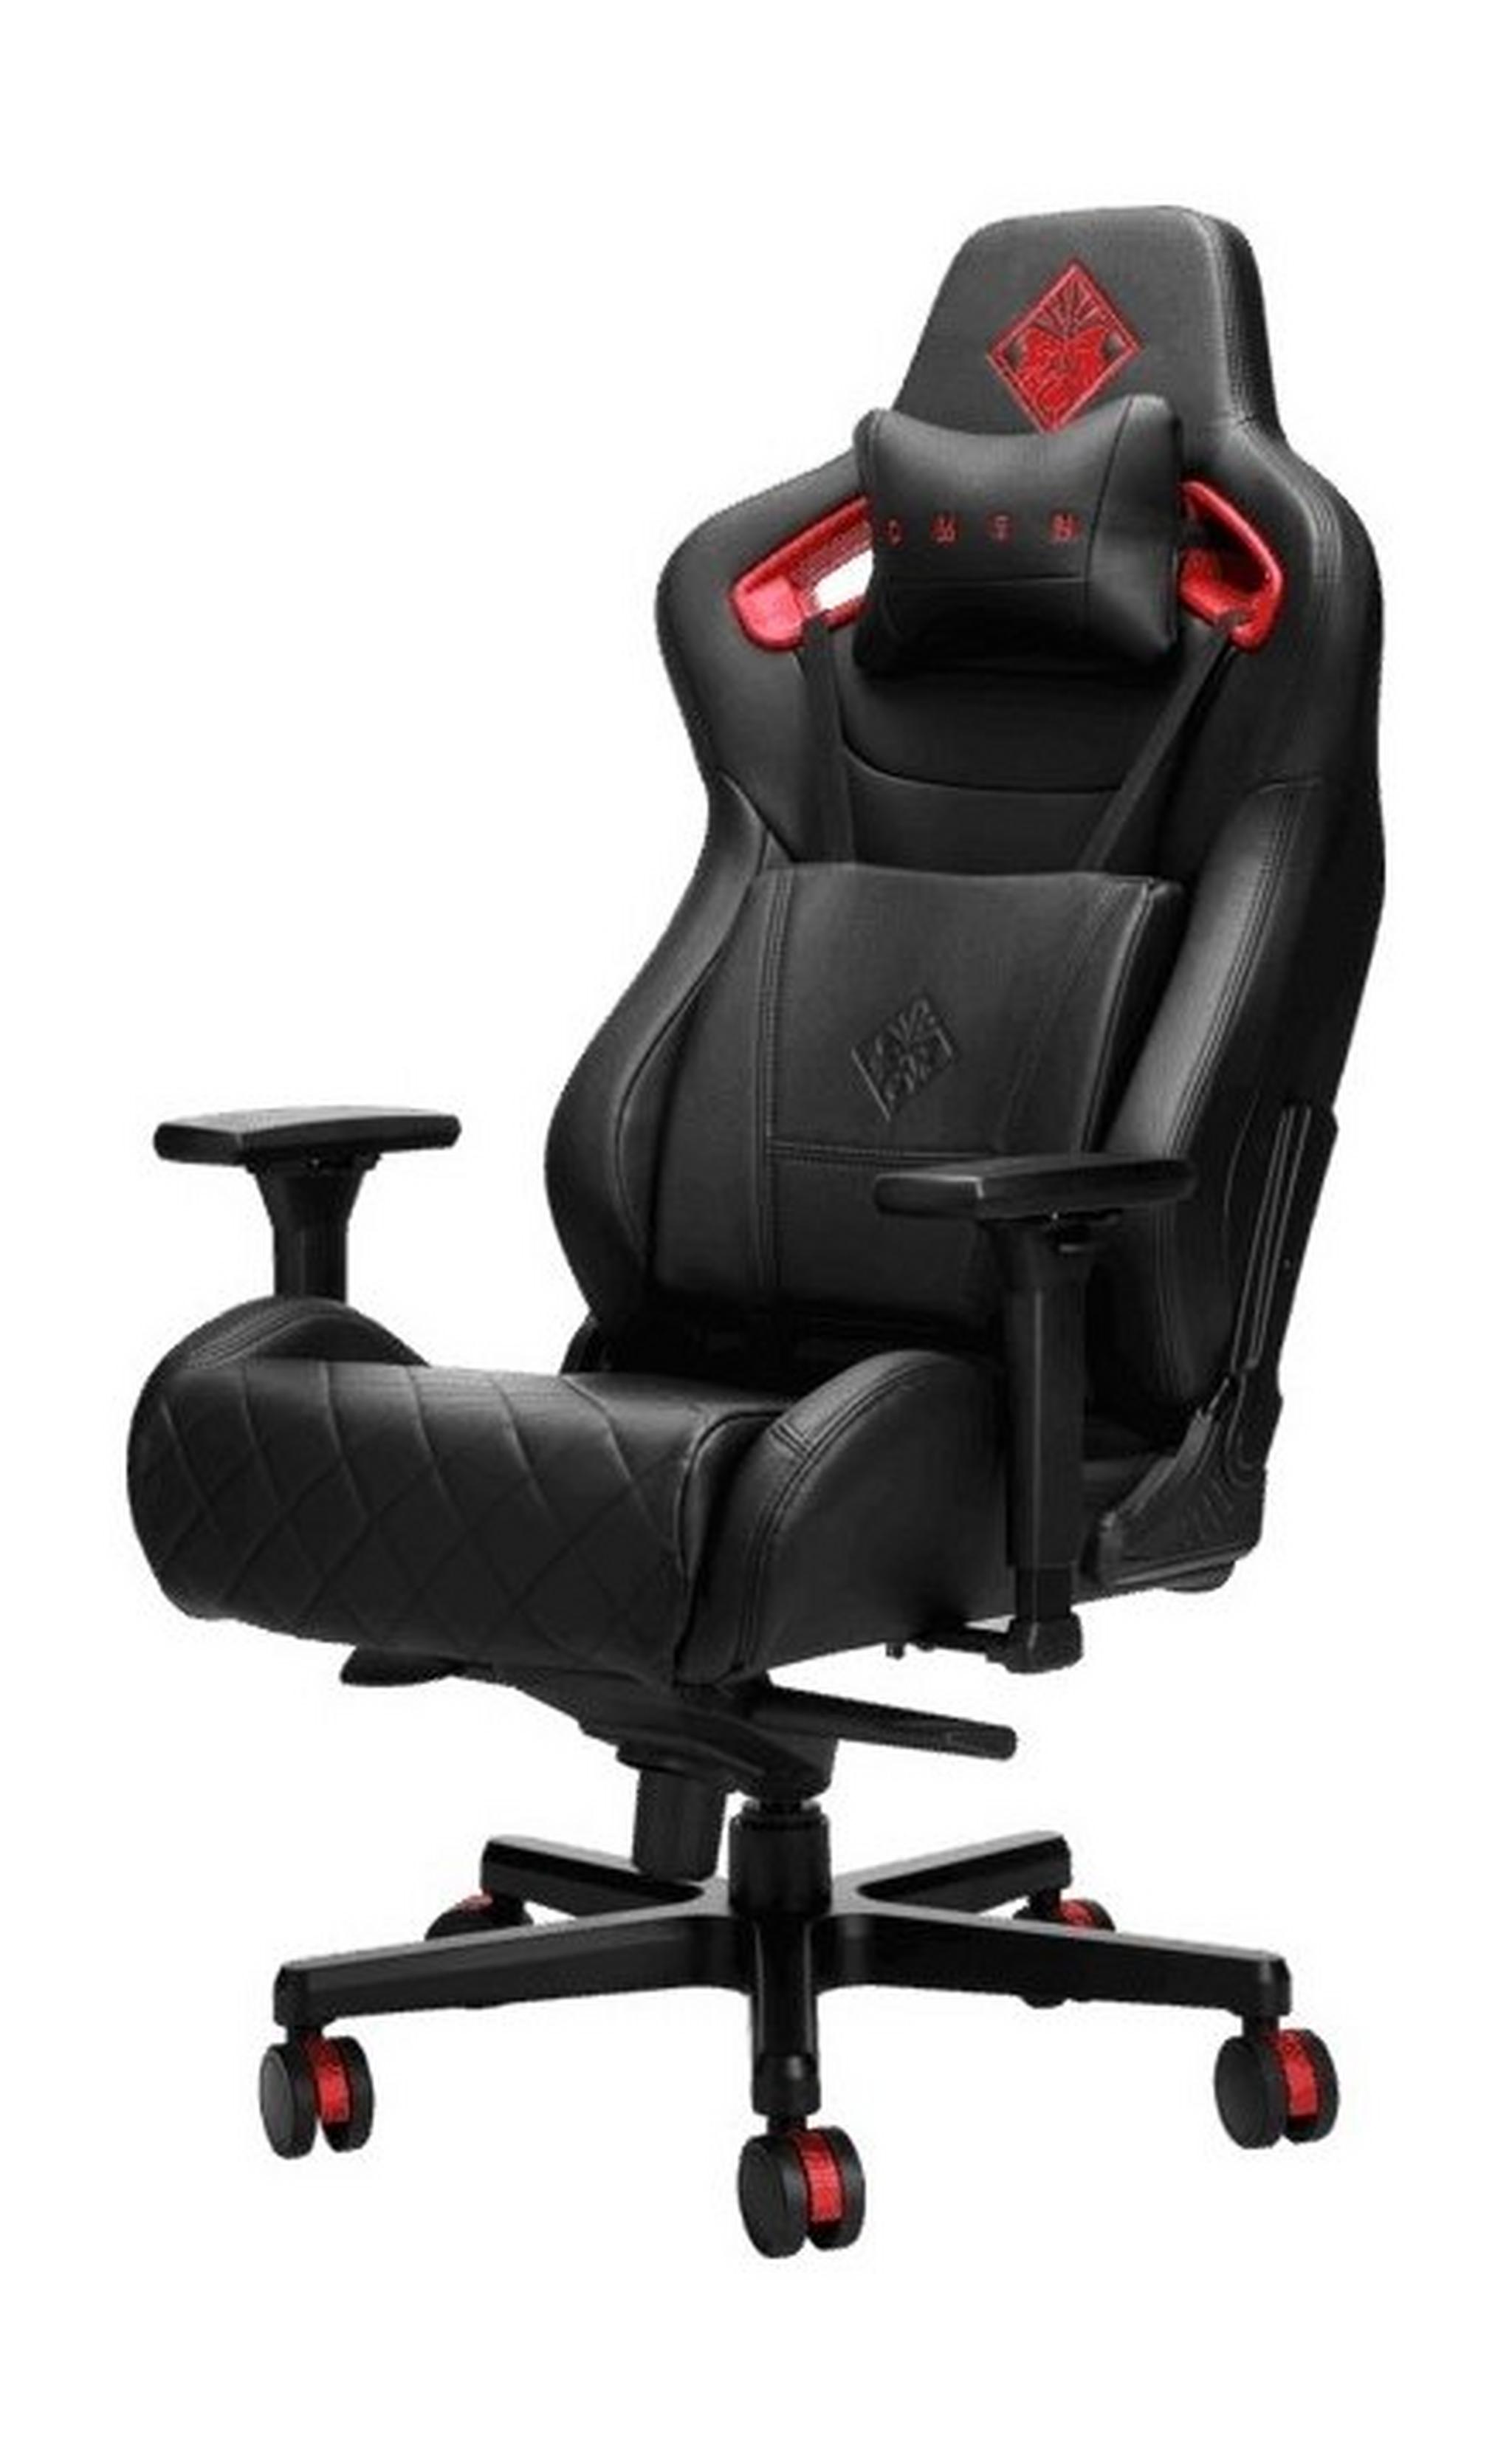 HP Omen Gaming Chair - Red